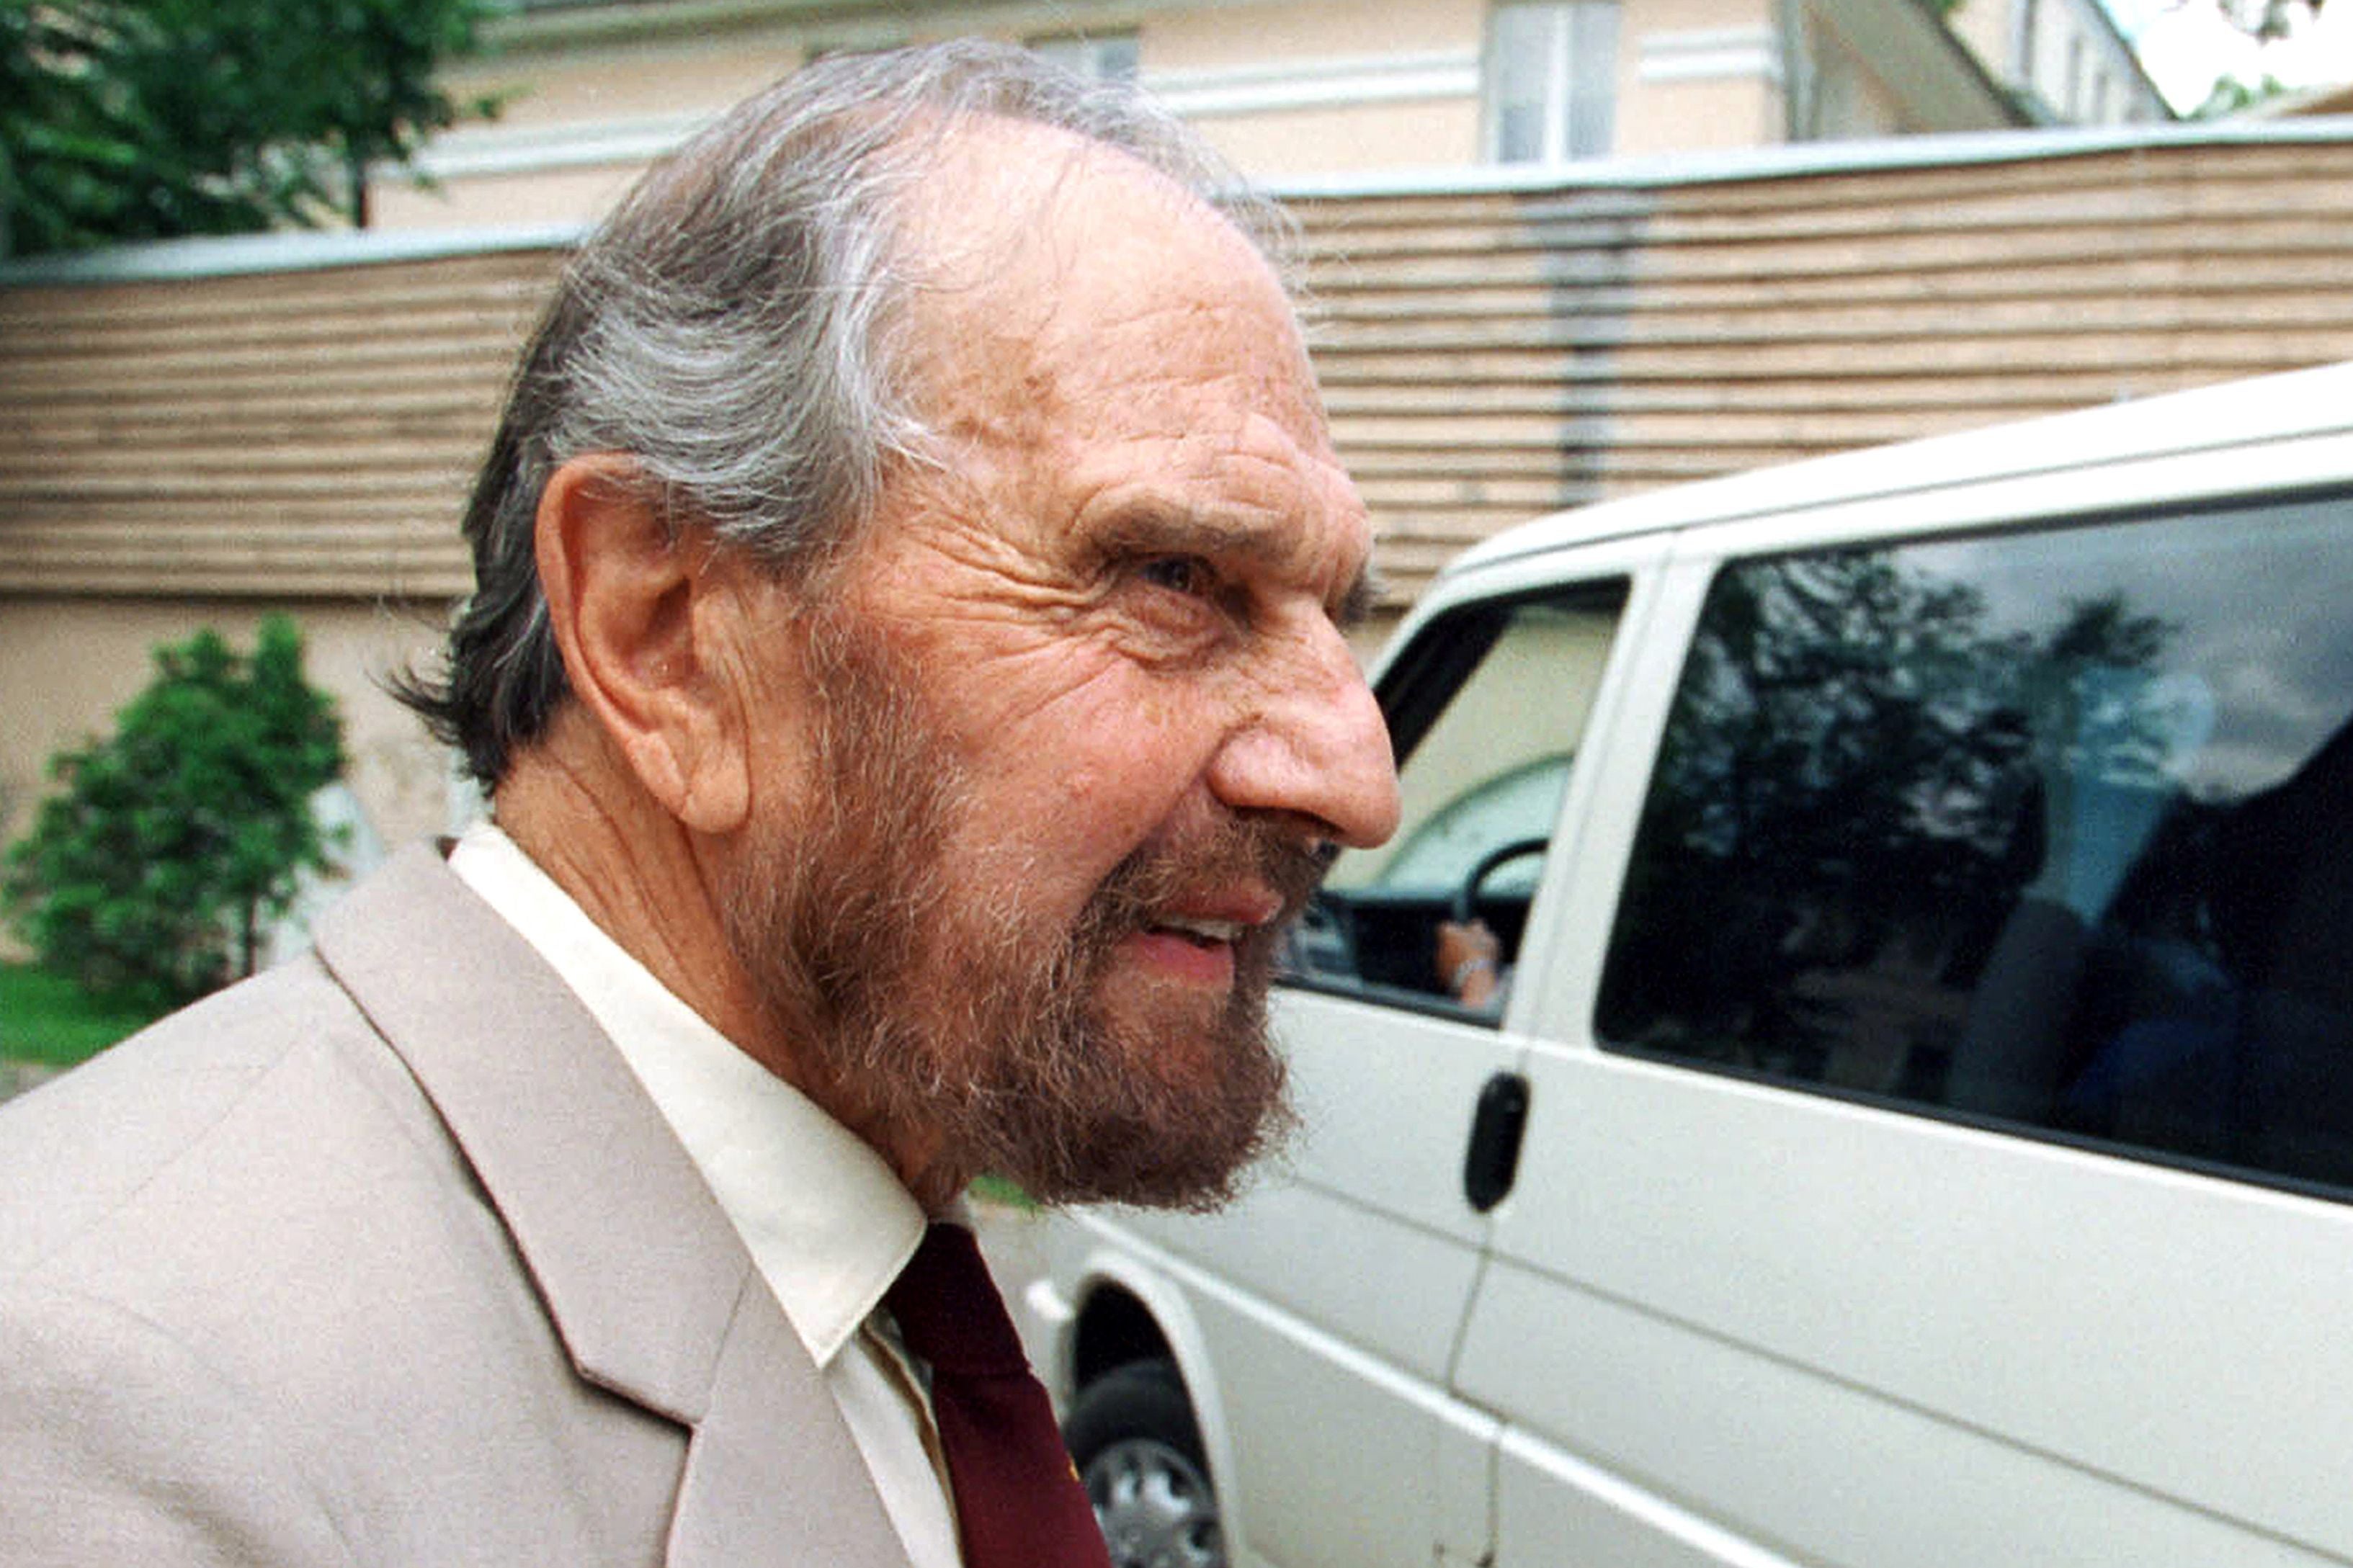 Blake in Moscow, June 2001